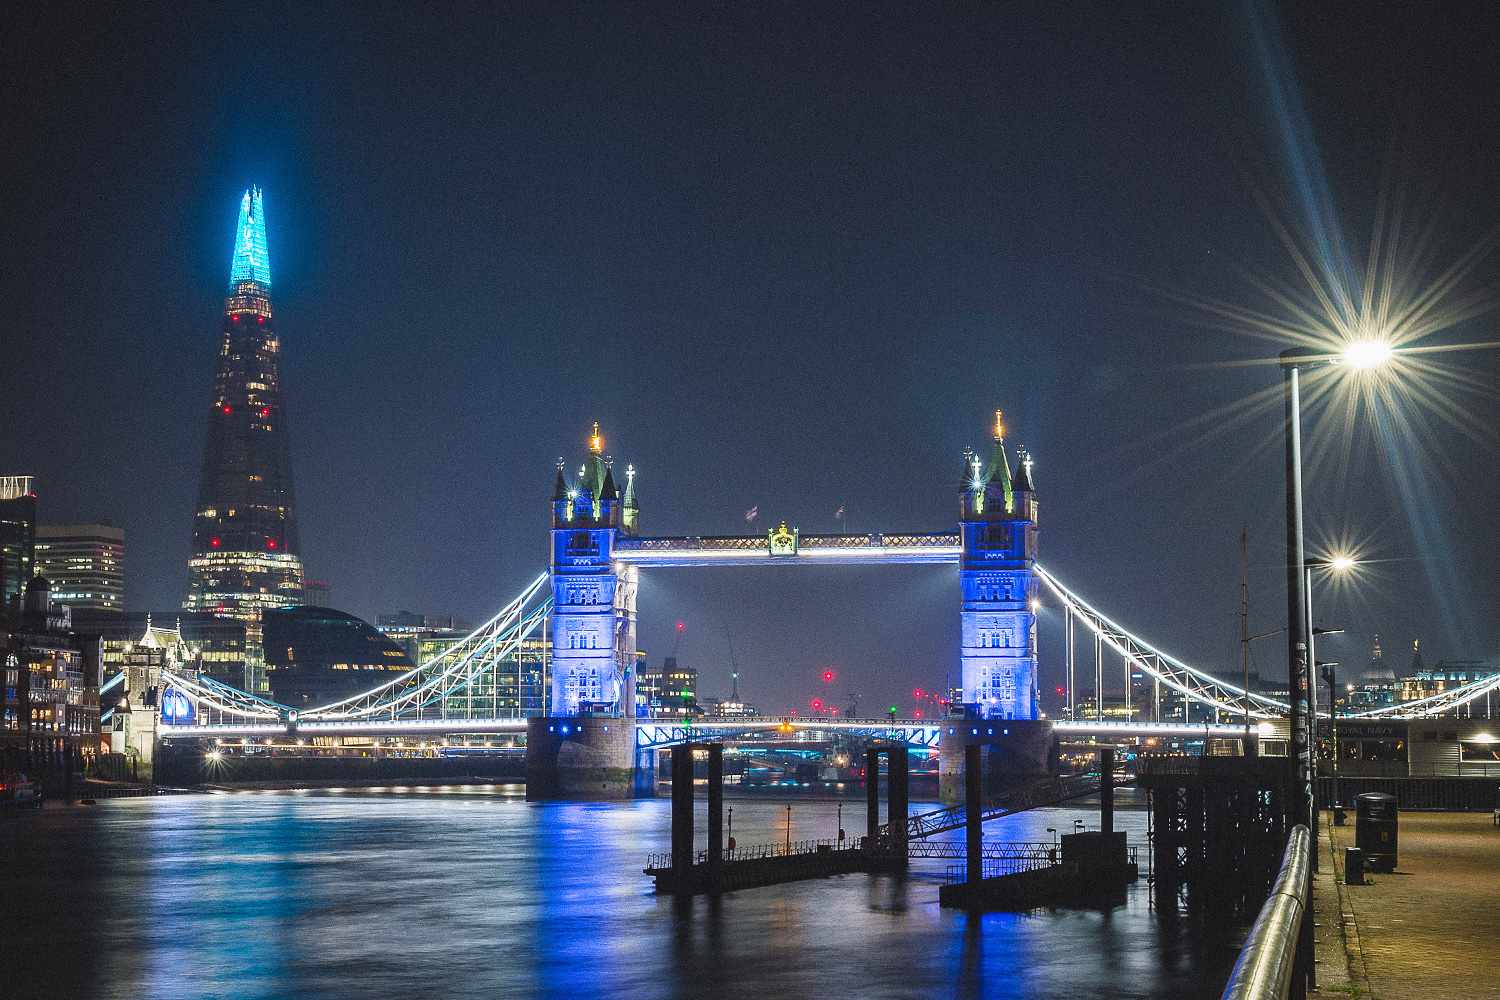 The Shard and Tower Bridge are lit up blue to show appreciation and support for NHS staff during the COVID-19 outbreak March 26, 2020 in London, United Kingdom